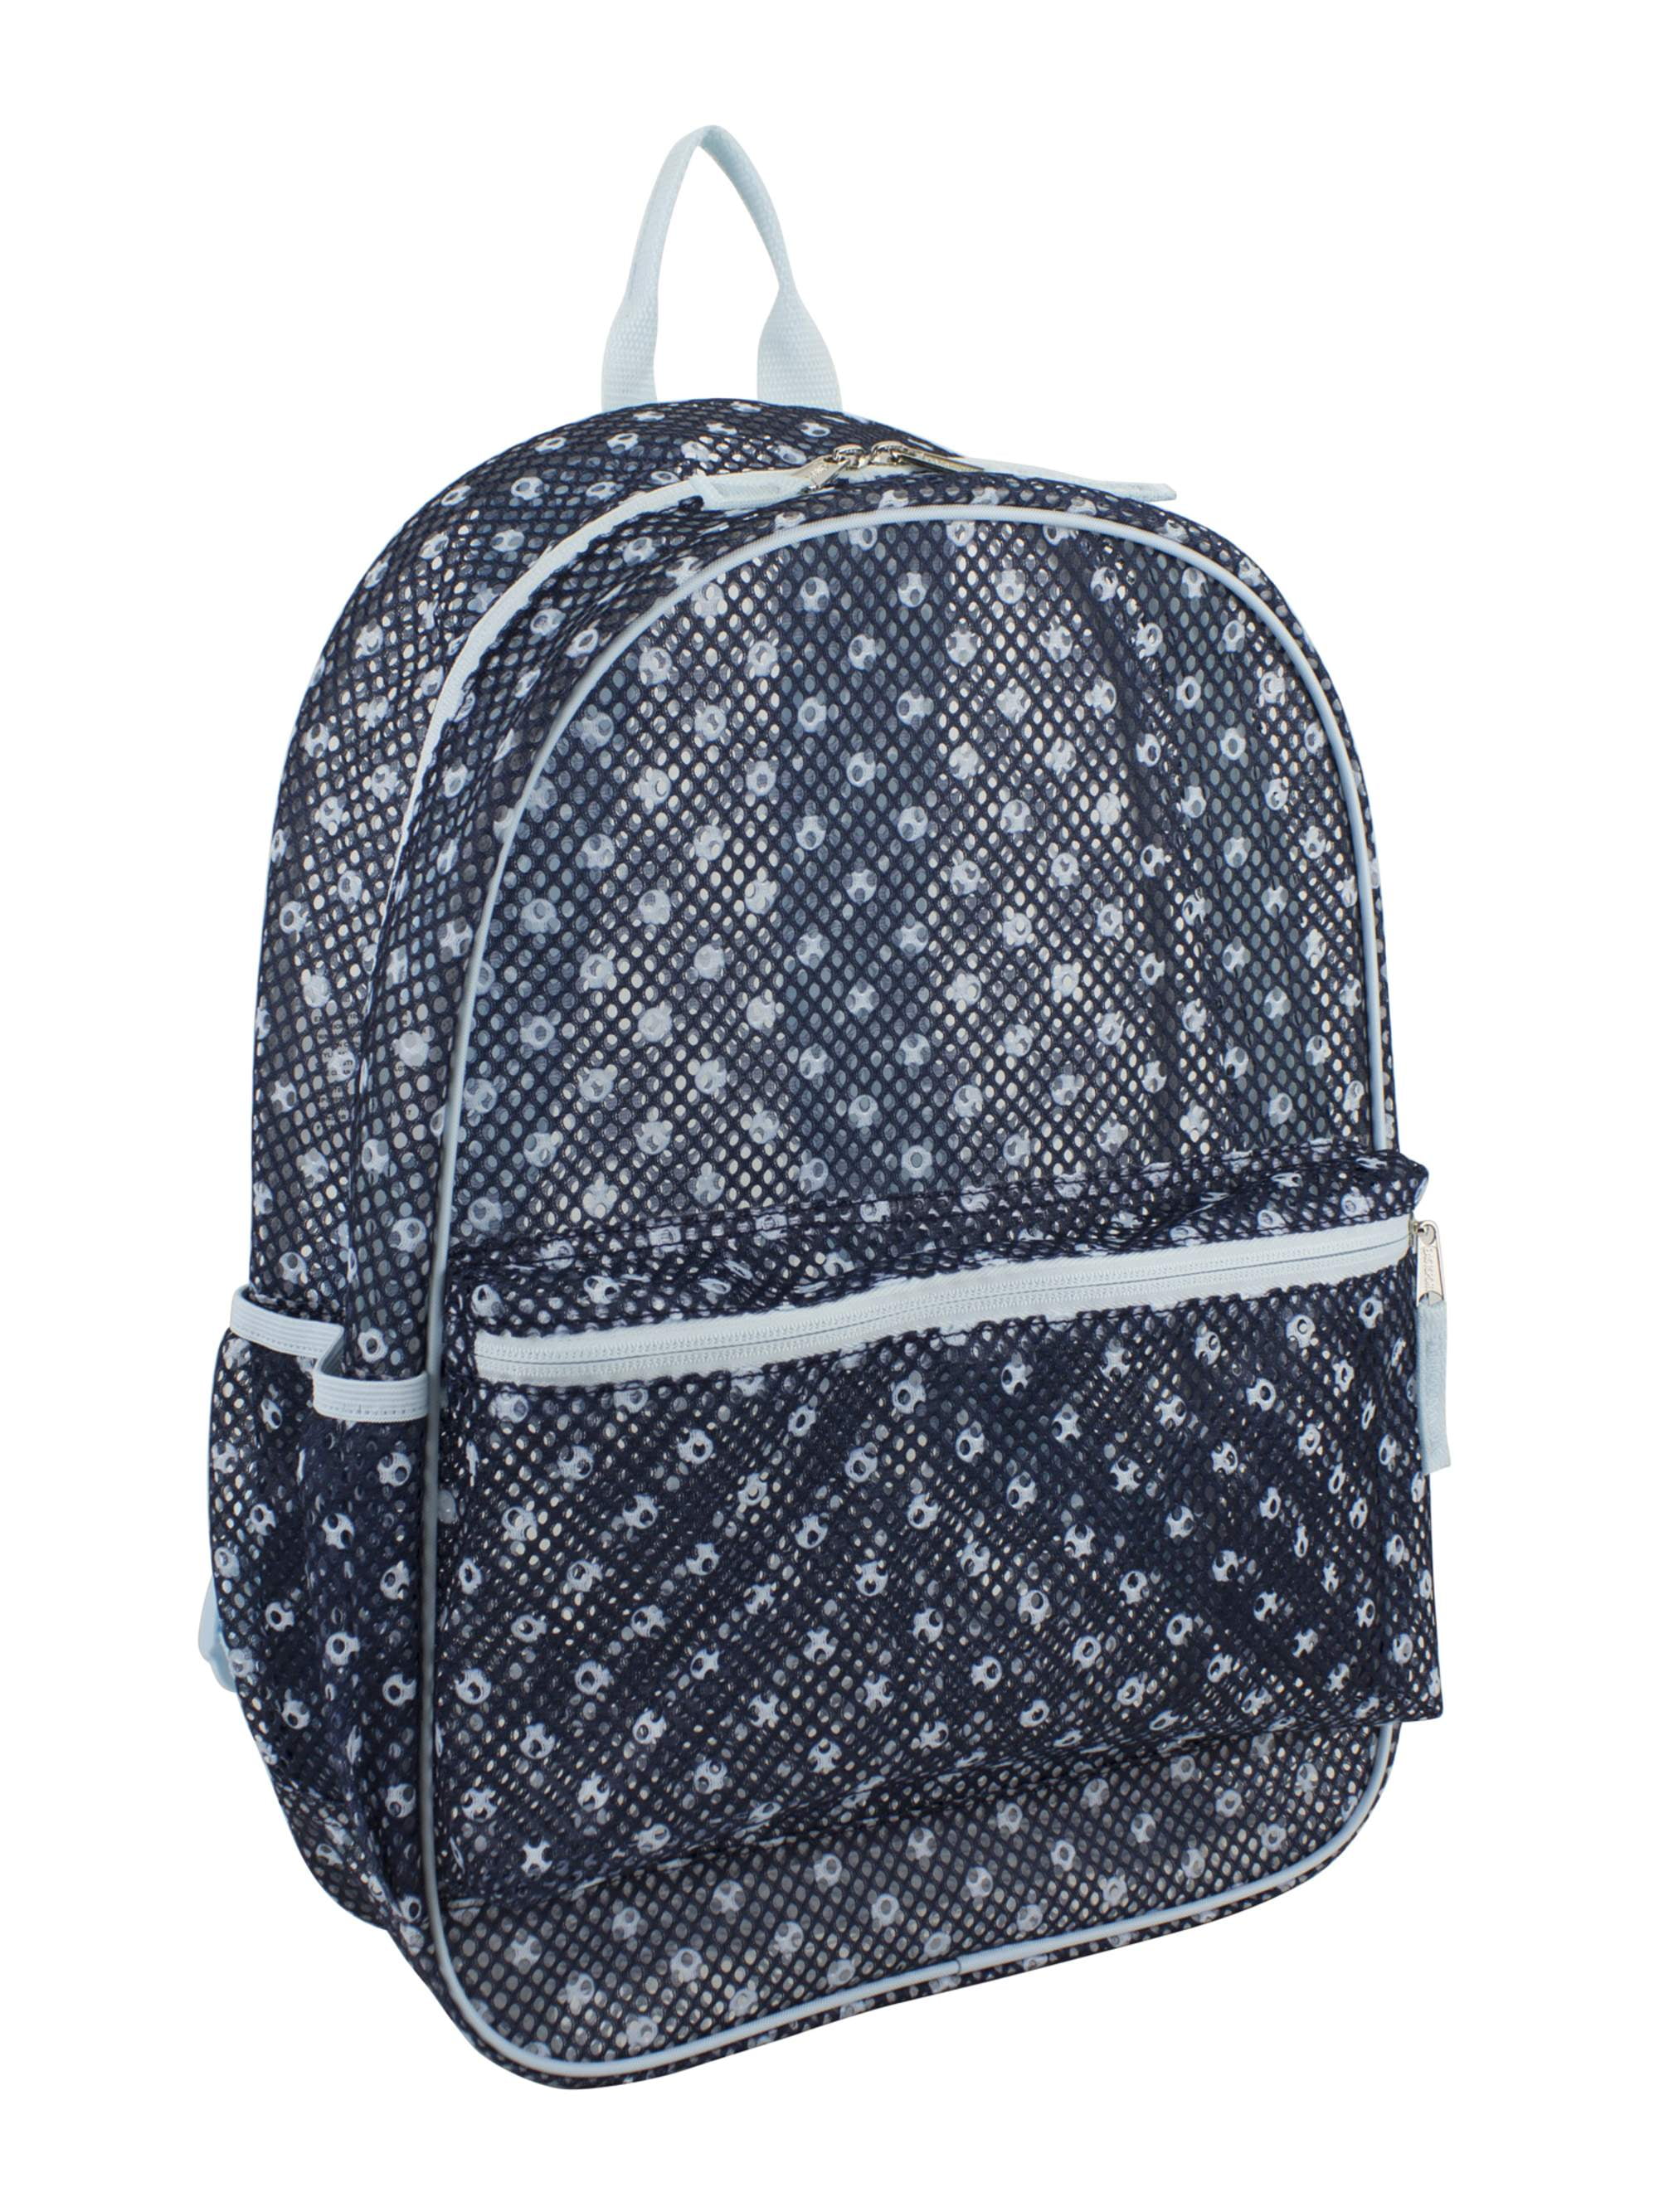 Mesh Backpack with Padded Adjustable Straps - 0